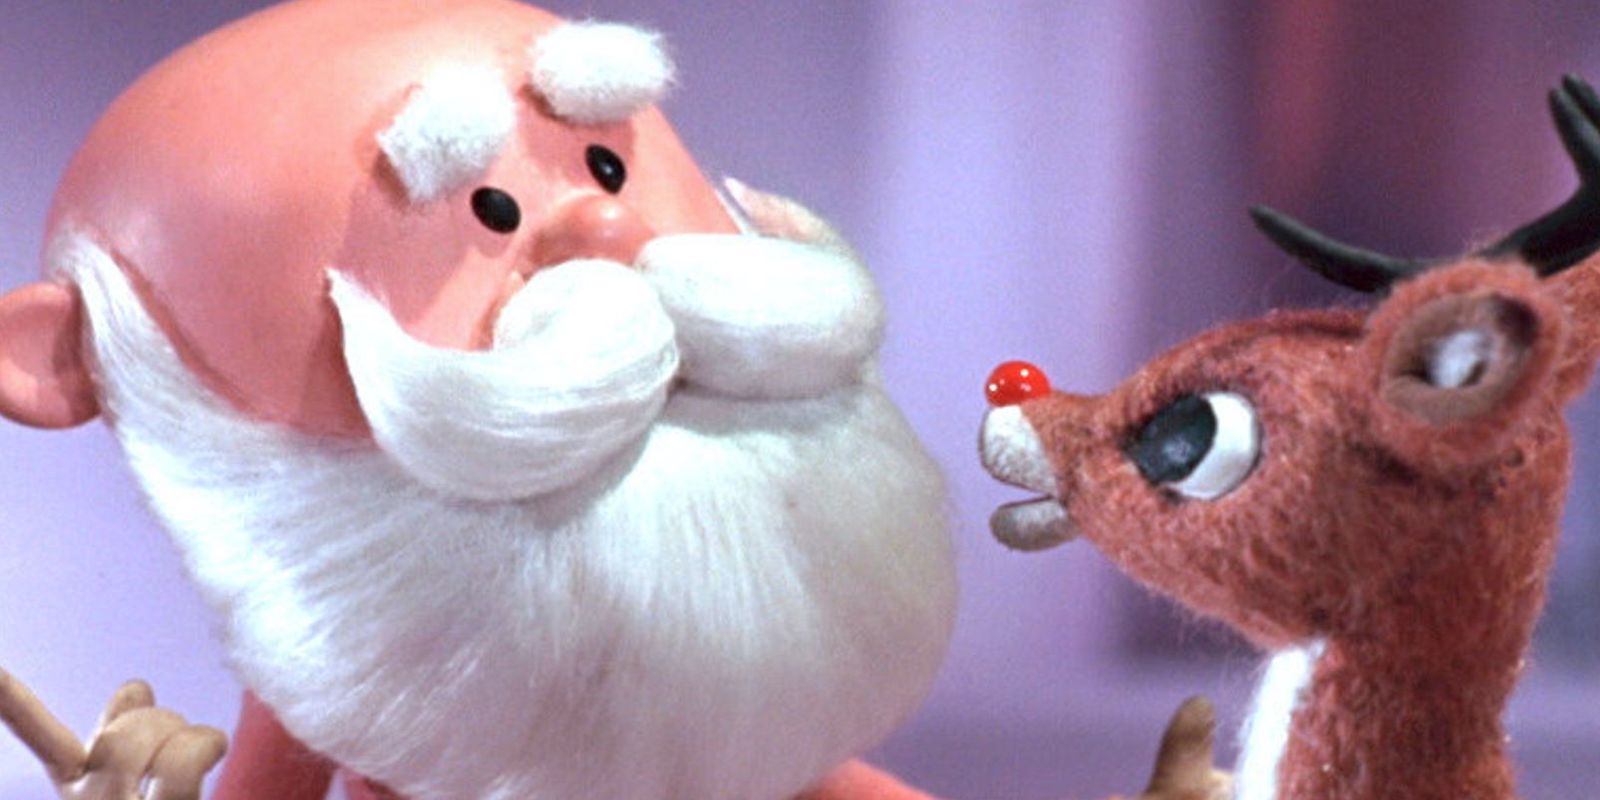 Santa and Rudolph from the 1964 Christmas classic film Rudolph the Red Nosed Reindeer.